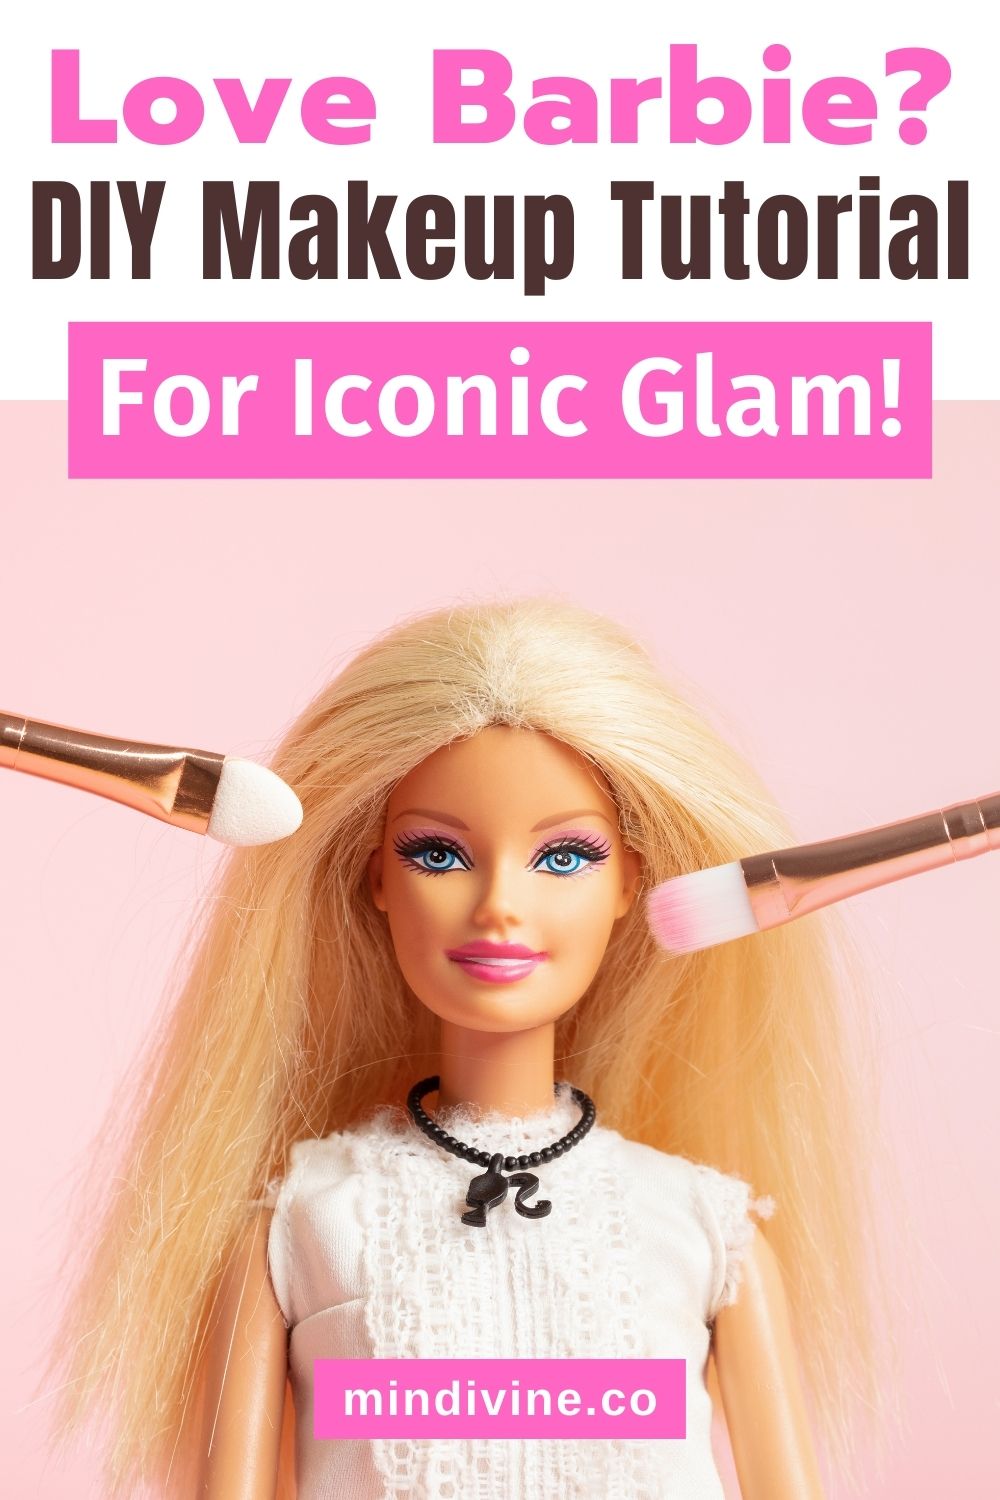 Close-up portrait of glamour blonde Barbie doll with make-up brushes near her face.